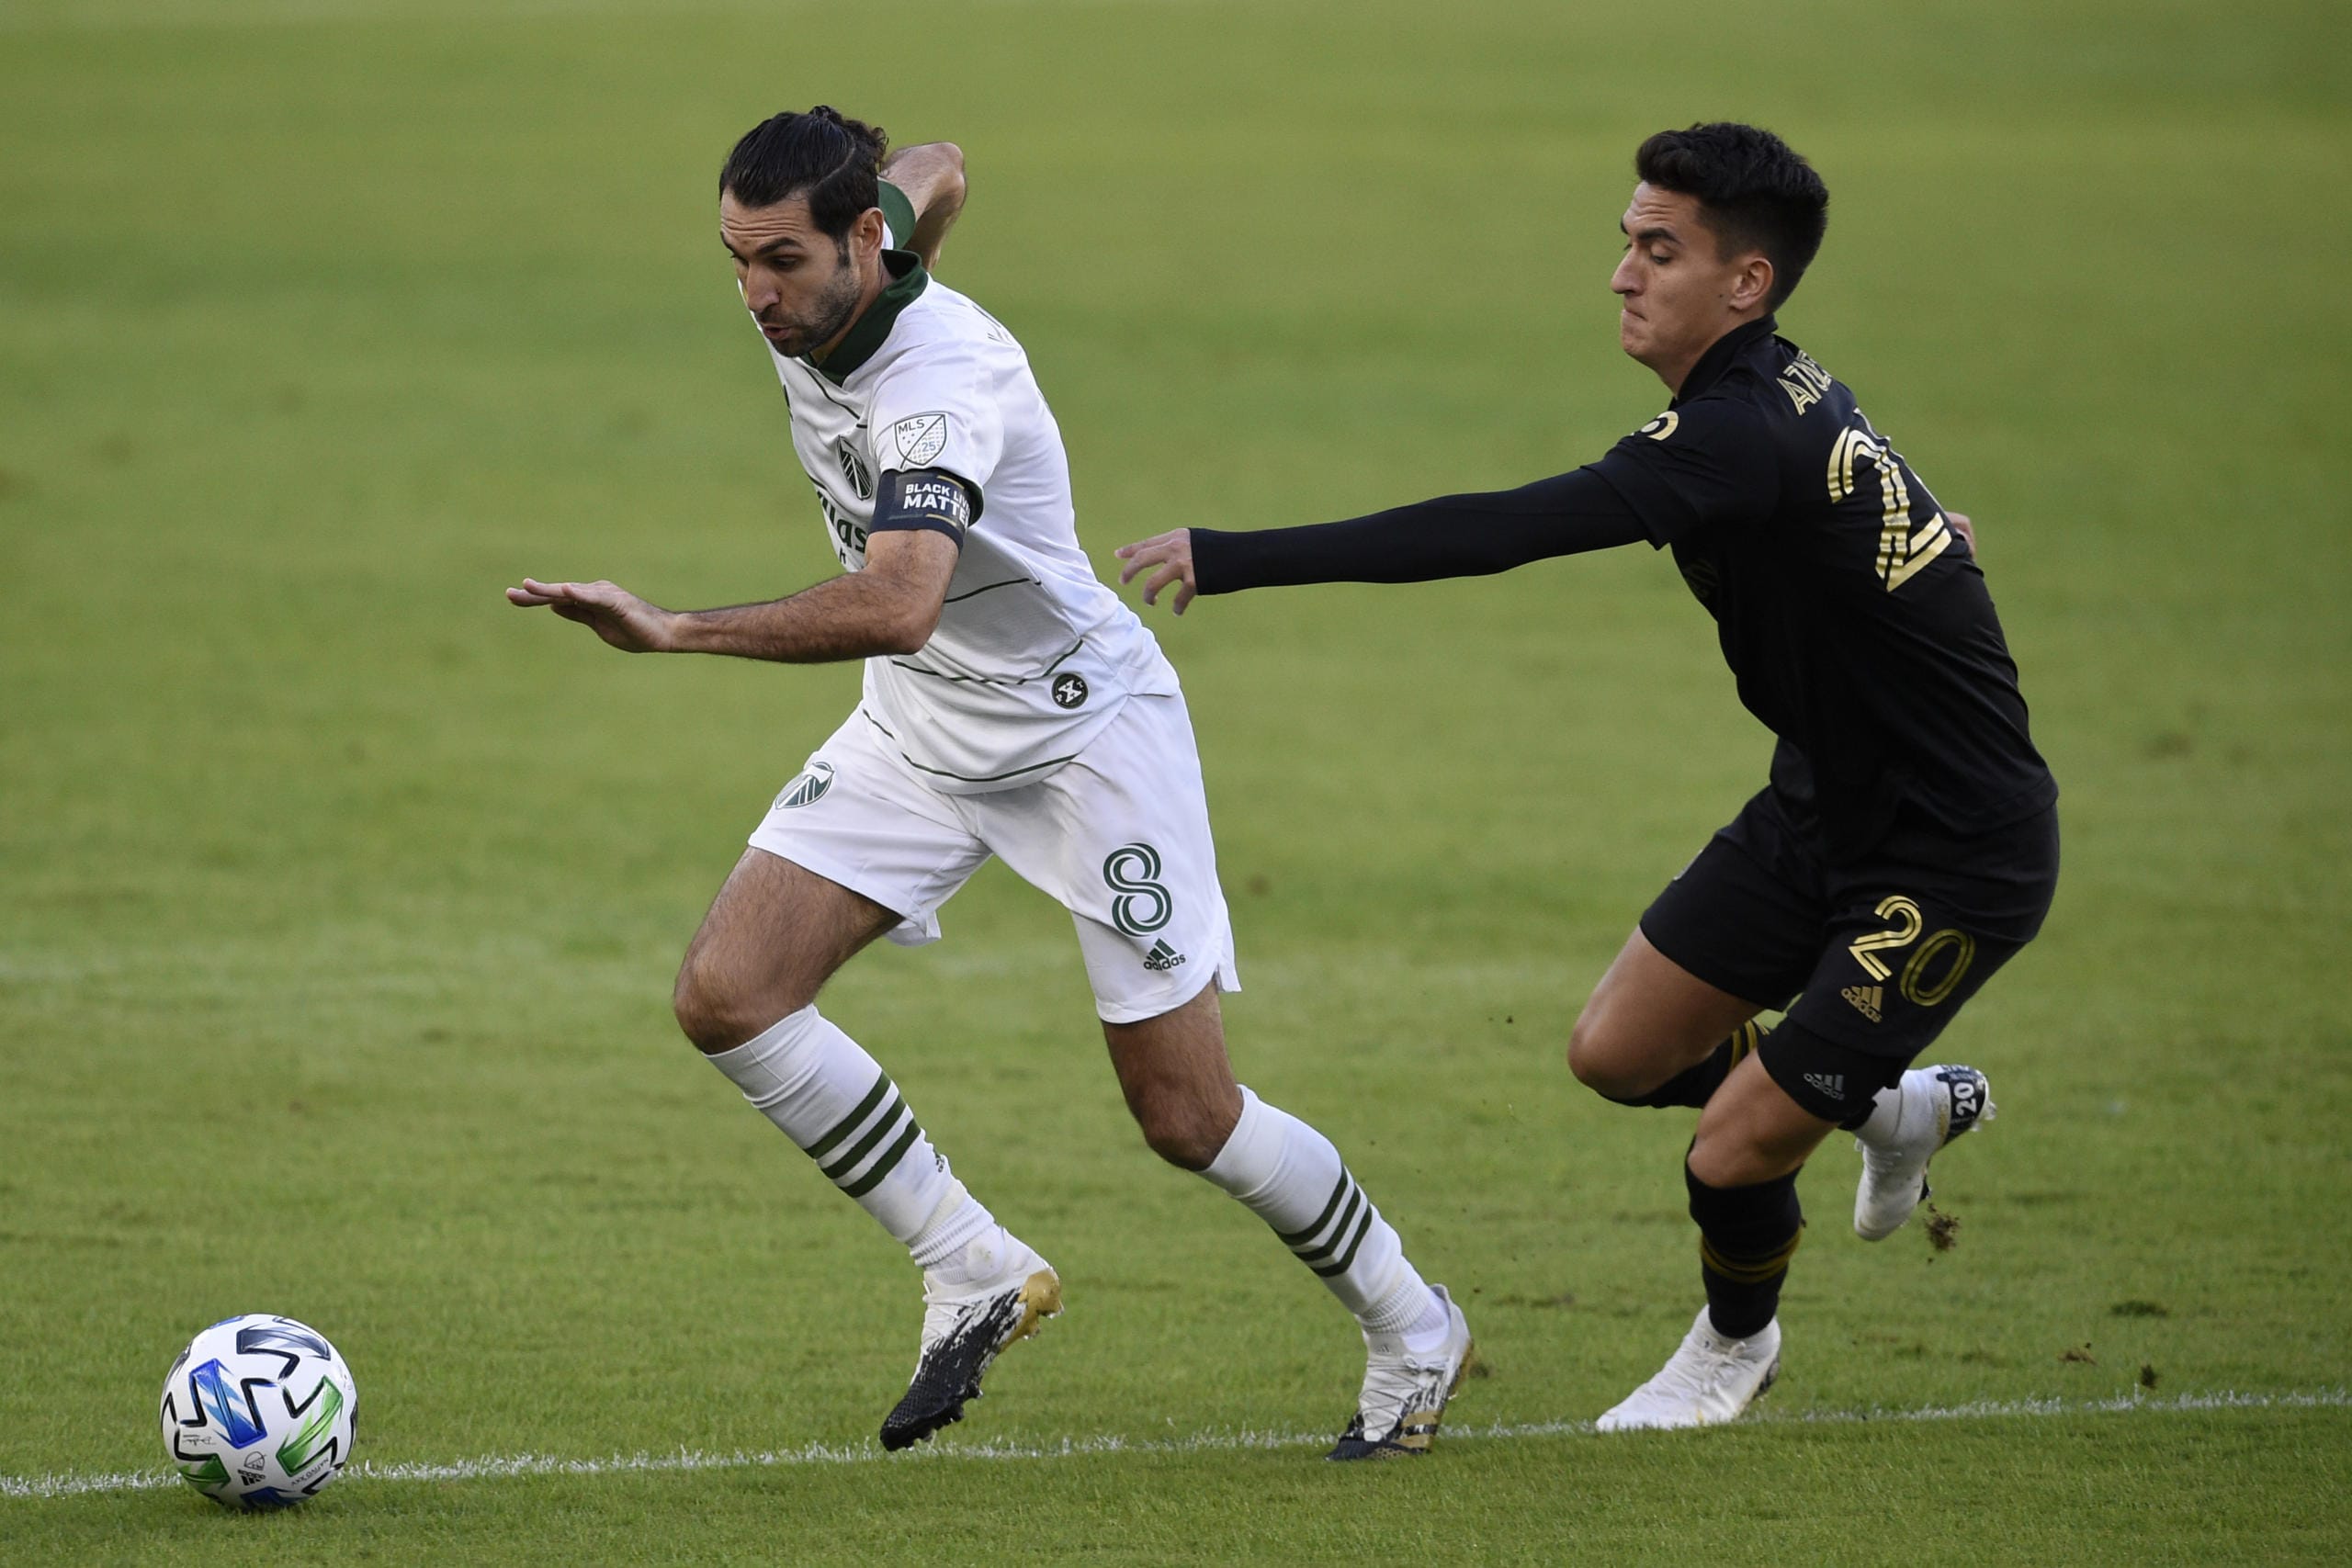 Portland Timbers midfielder Diego Valeri, left, handles the ball while pressured by Los Angeles FC midfielder Eduard Atuesta during the first half of an MLS soccer match in Los Angeles, Sunday, Nov. 8, 2020.